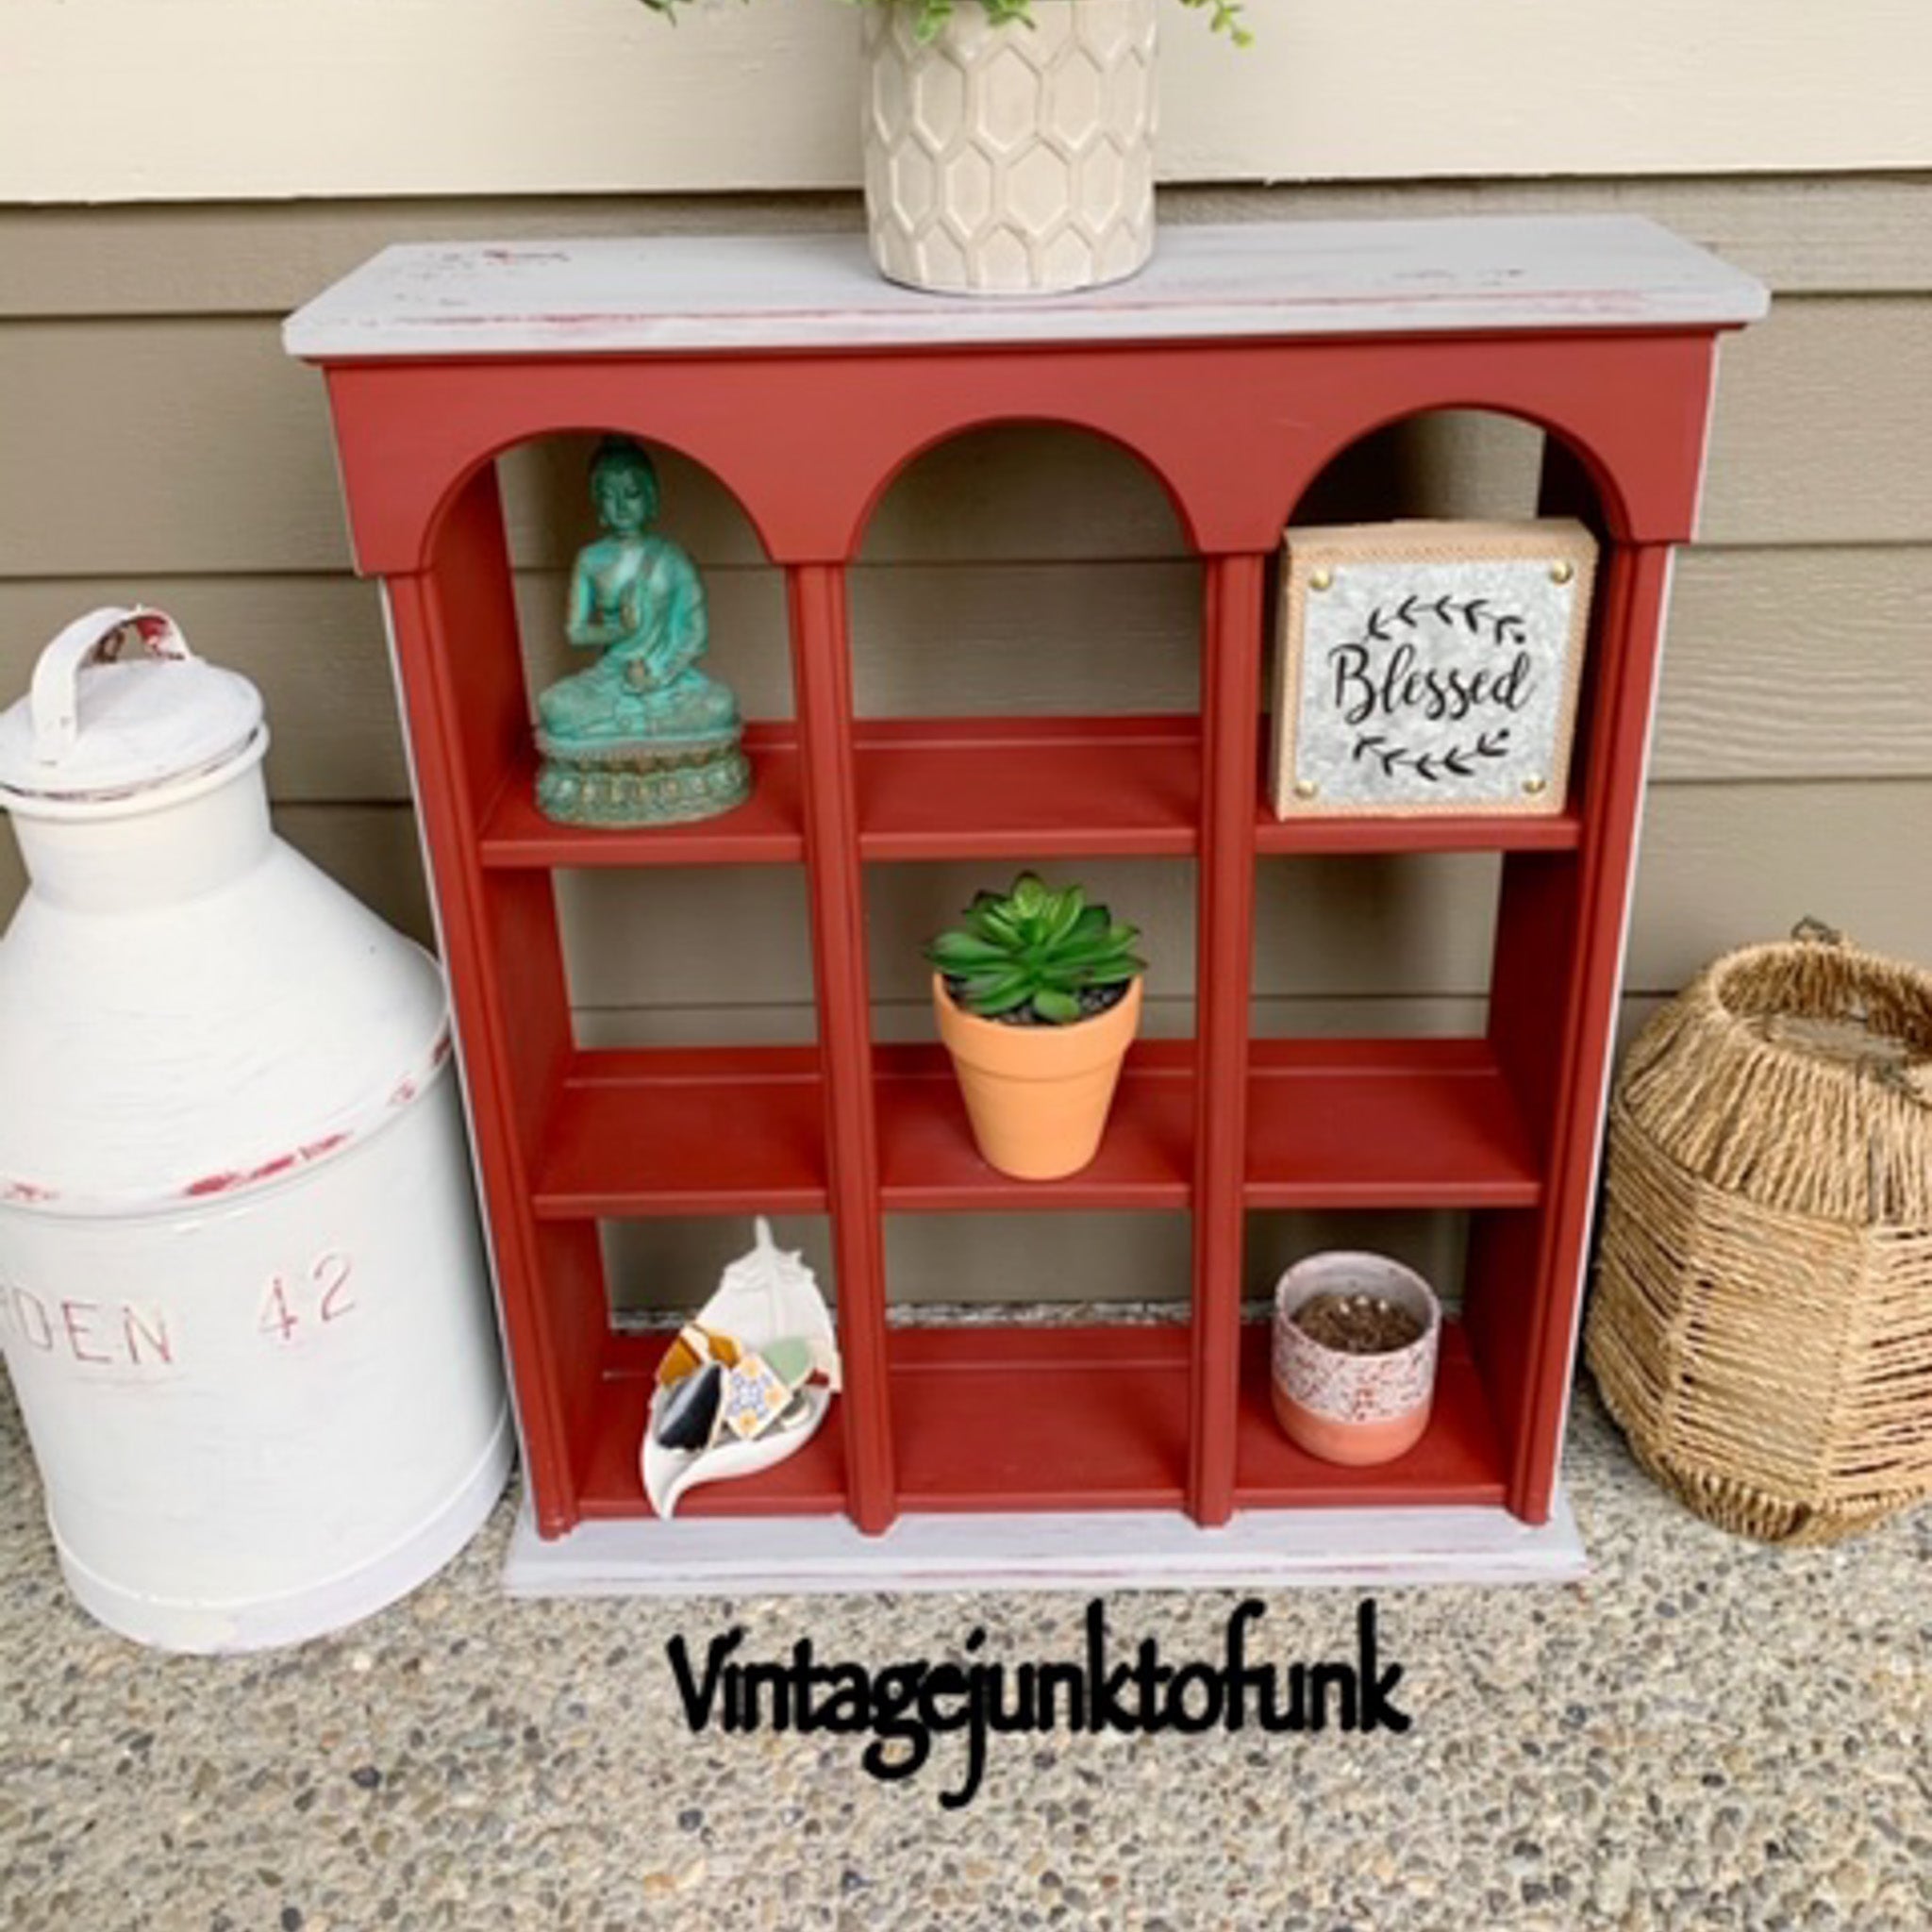 A small vintage hutch top refurbished by Vintage Junk to Funk is painted in Dixie Belle's Rustic Red chalk mineral paint.